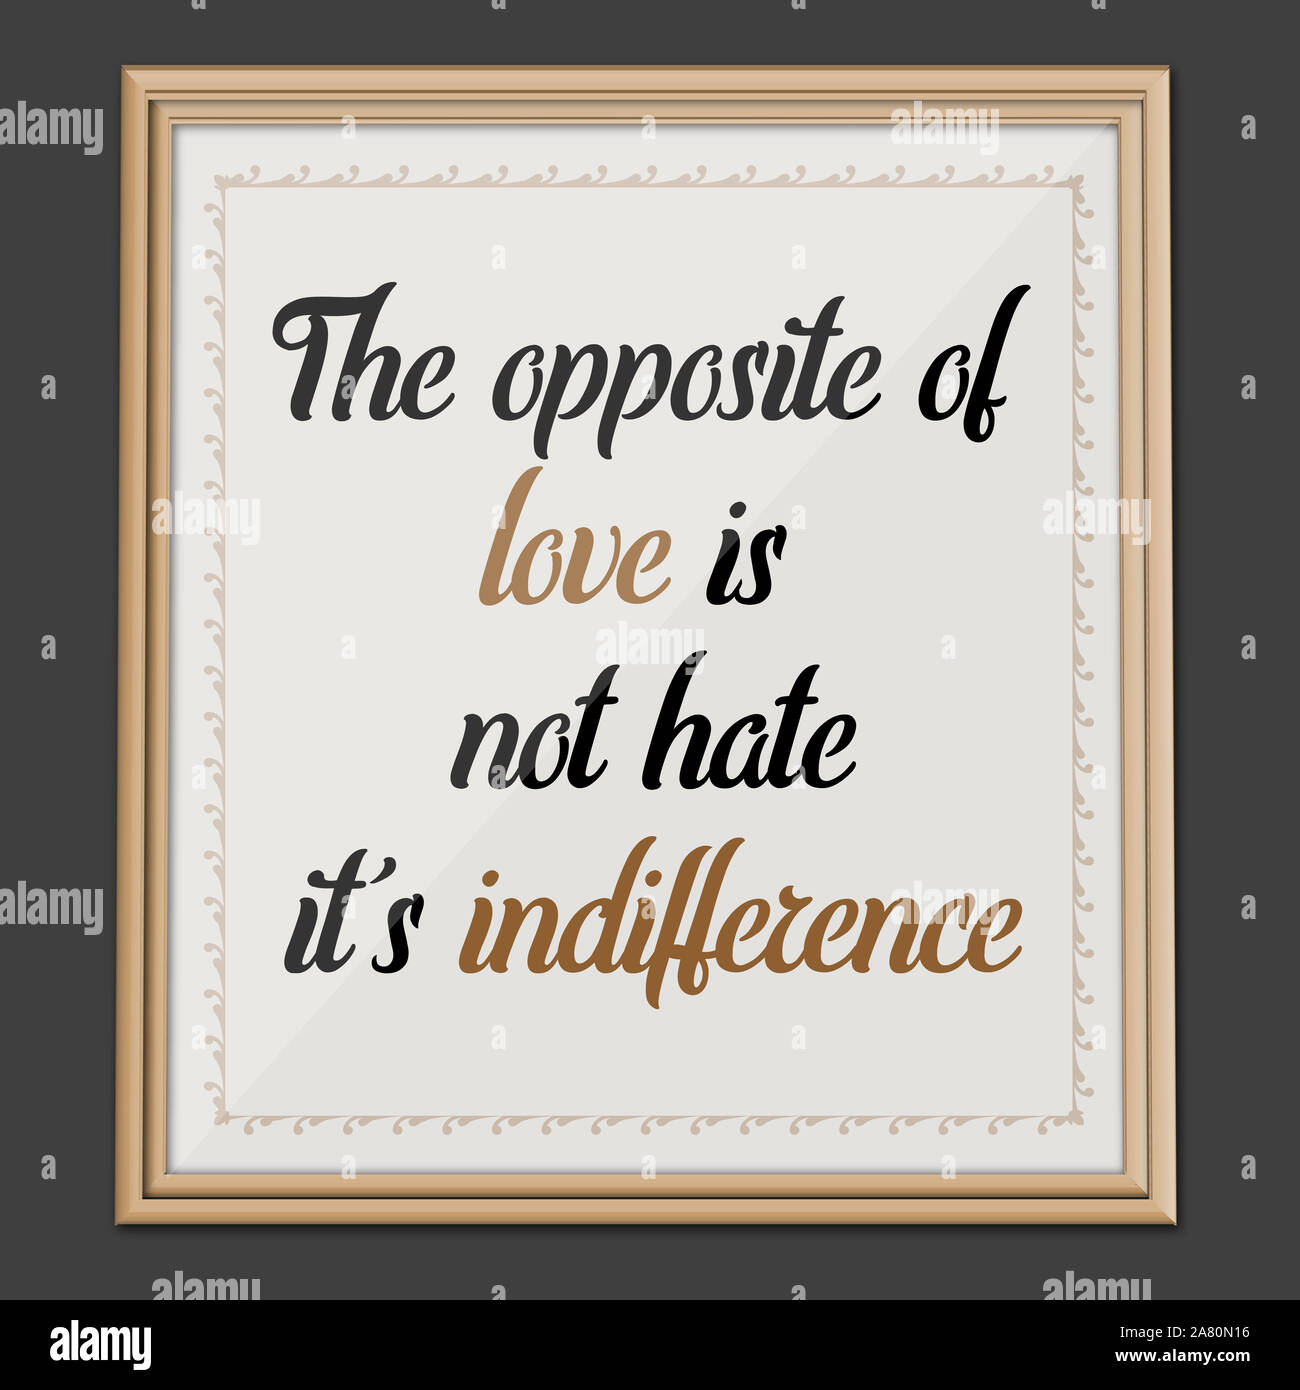 The Opposite of Love, is not hate. Motivation and Inspirational Quote Wall art Poster Stock Photo